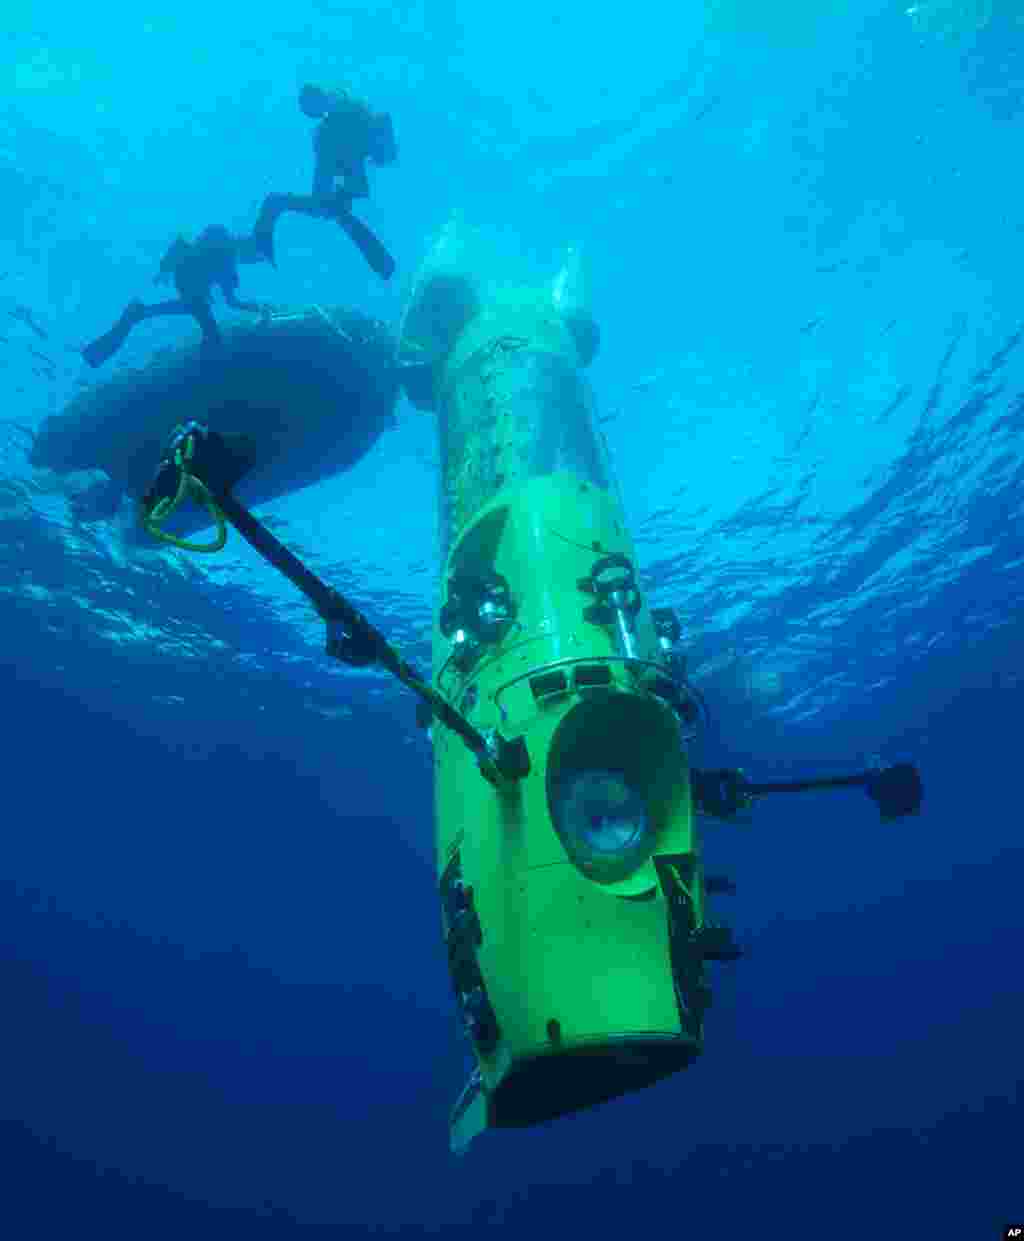 The DEEPSEA CHALLENGER begins its first 2.5-mile test dive off the coast of Papua New Guinea. (Photo: Mark Thiessen/National Geographic)